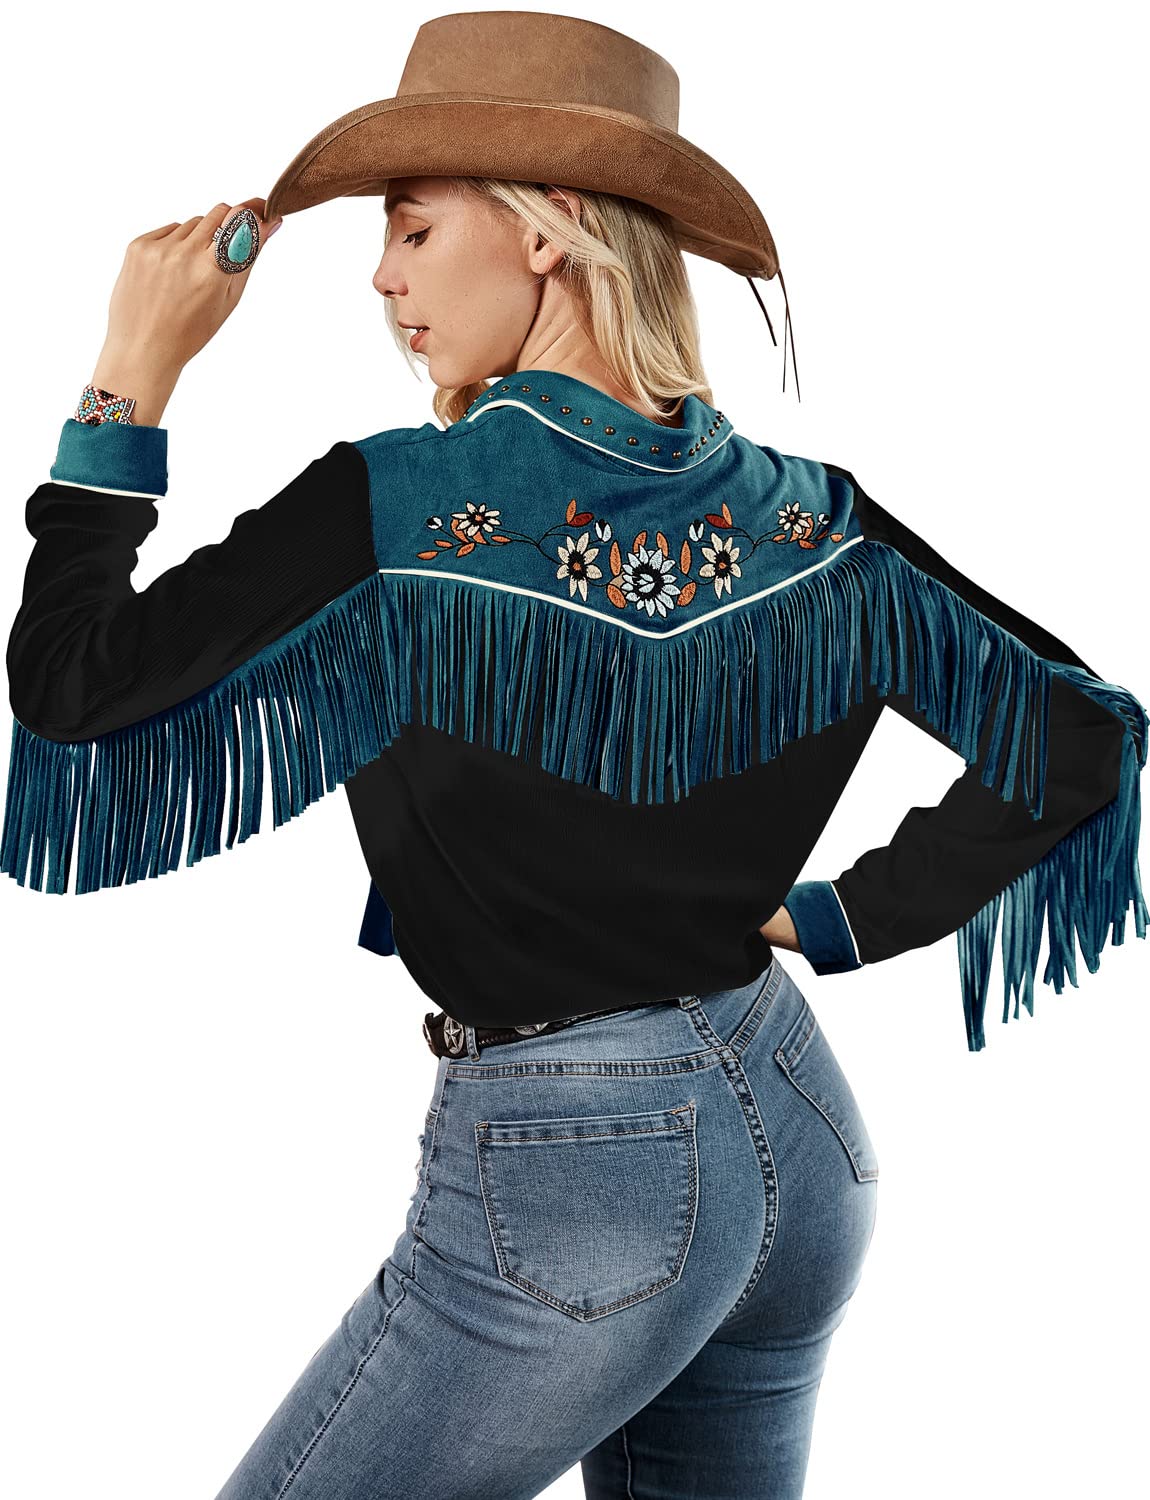 JOHN MOON Women's Embroidered Western Long Sleeve Buttons Down Shirts Fringed Retro Cowgirl Blouses Shirts Black